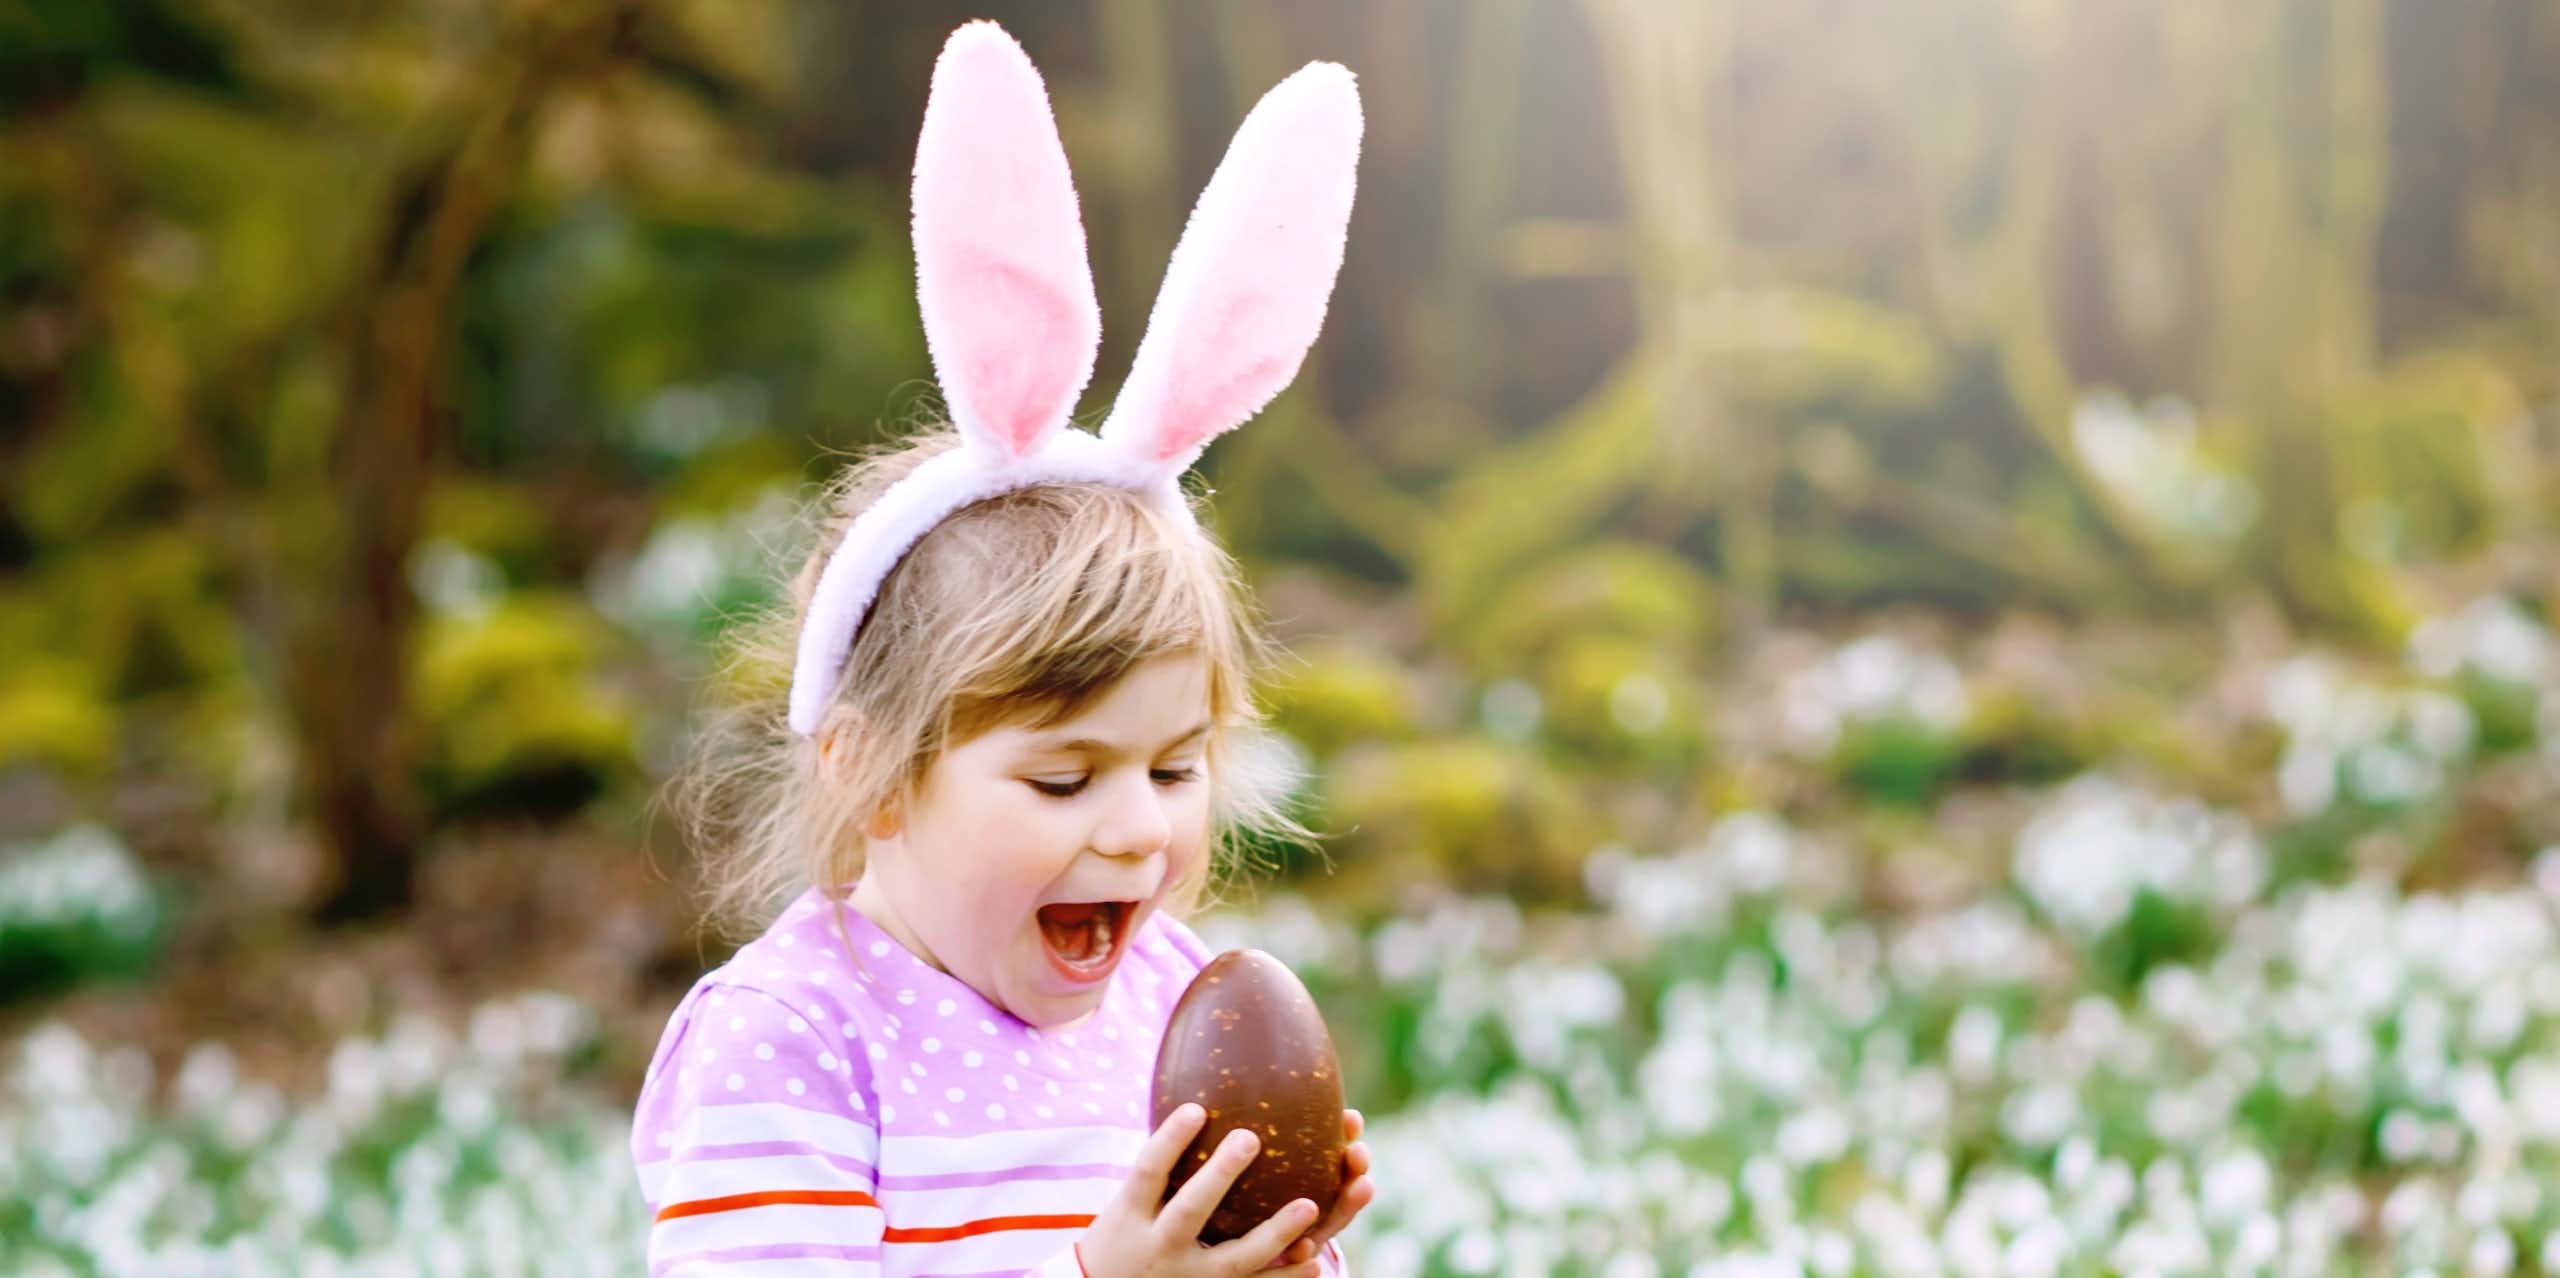 Little girl in bunny ears about to bite into an Easter egg